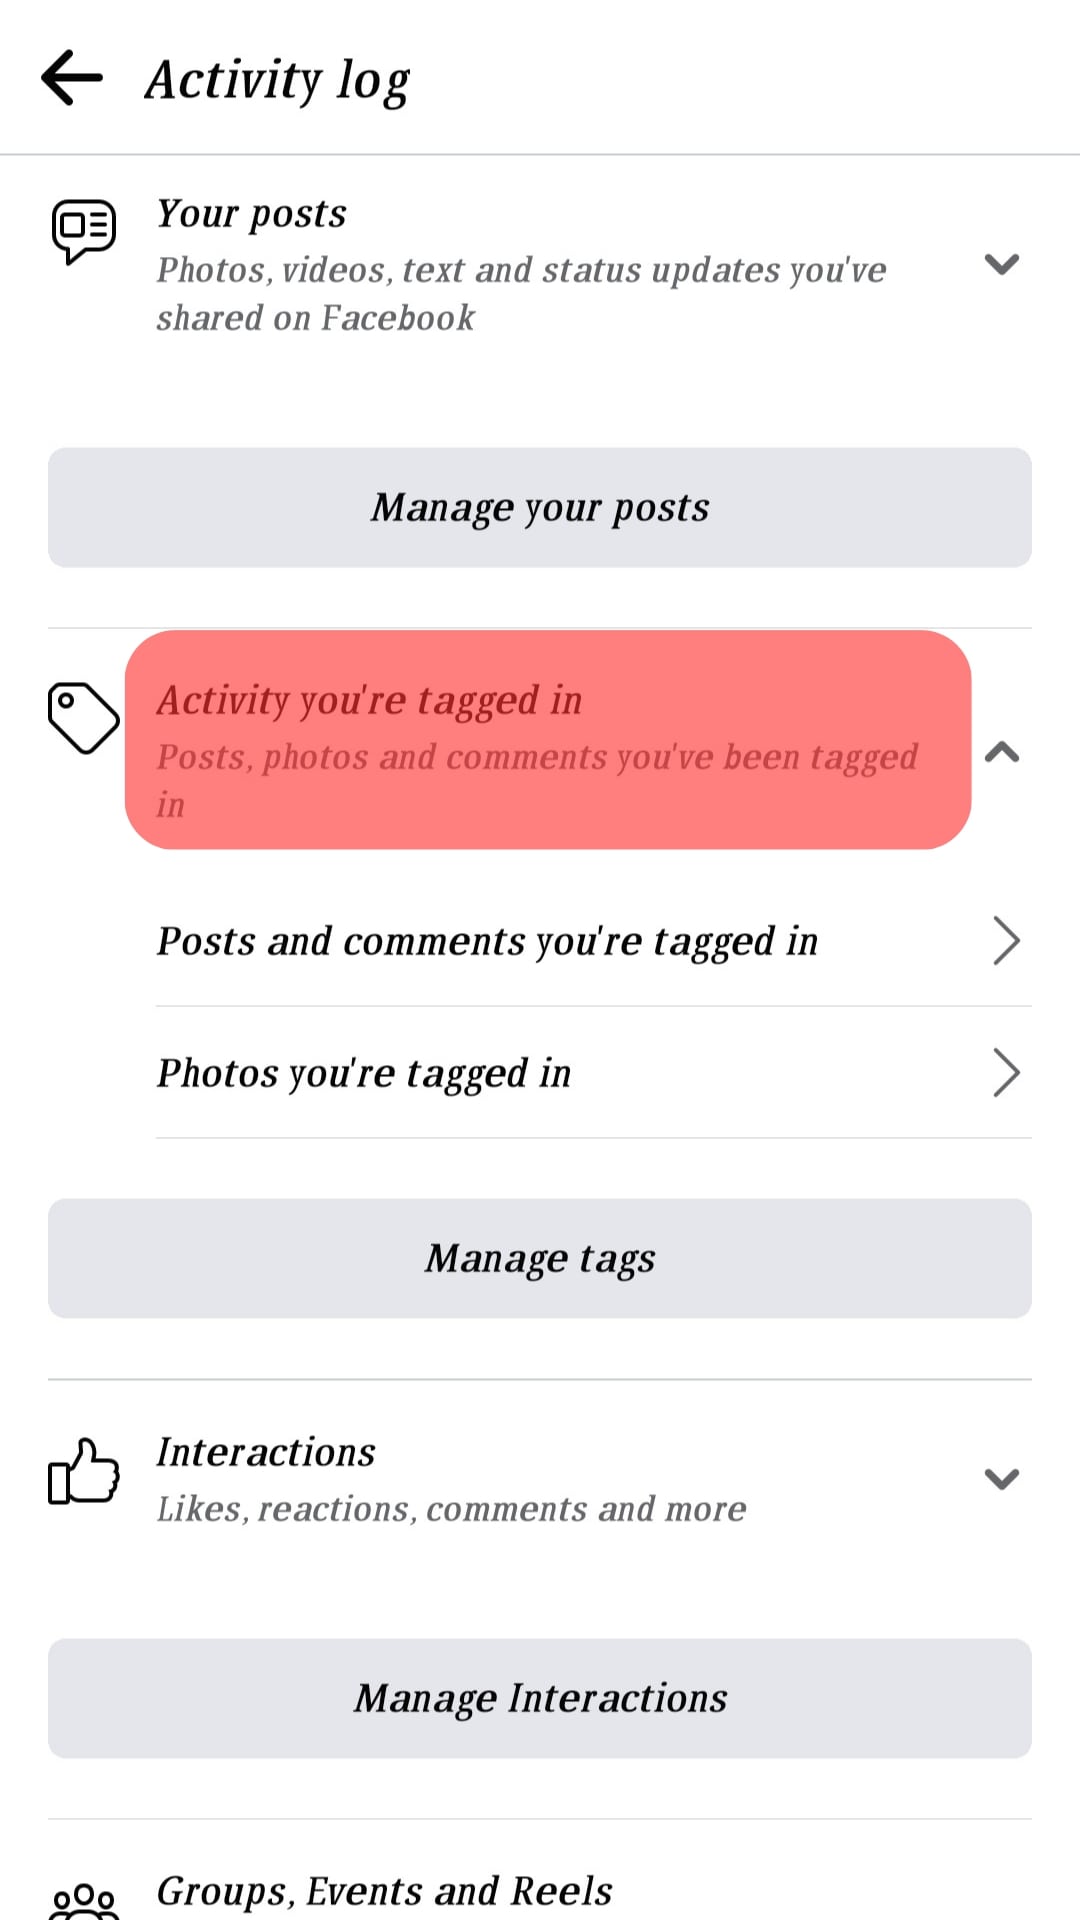 Tap On Activity You're Tagged In